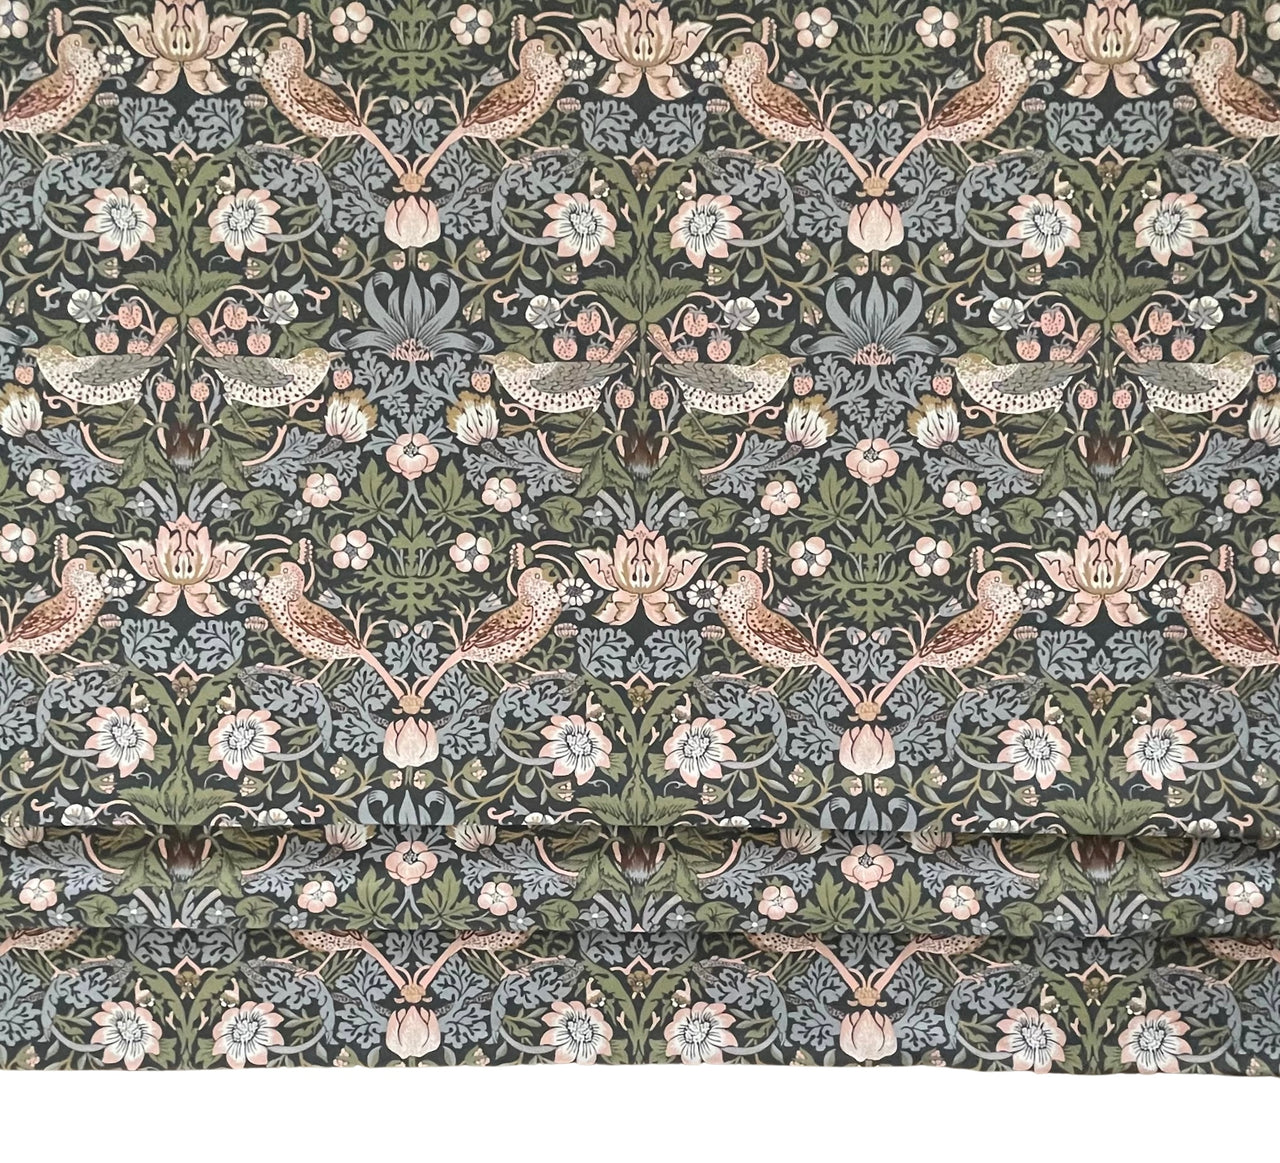 Custom William Morris Roman Blinds / Blue and Green Cotton with Strawberry Thief Pattern - Made to Measure for Home Decor